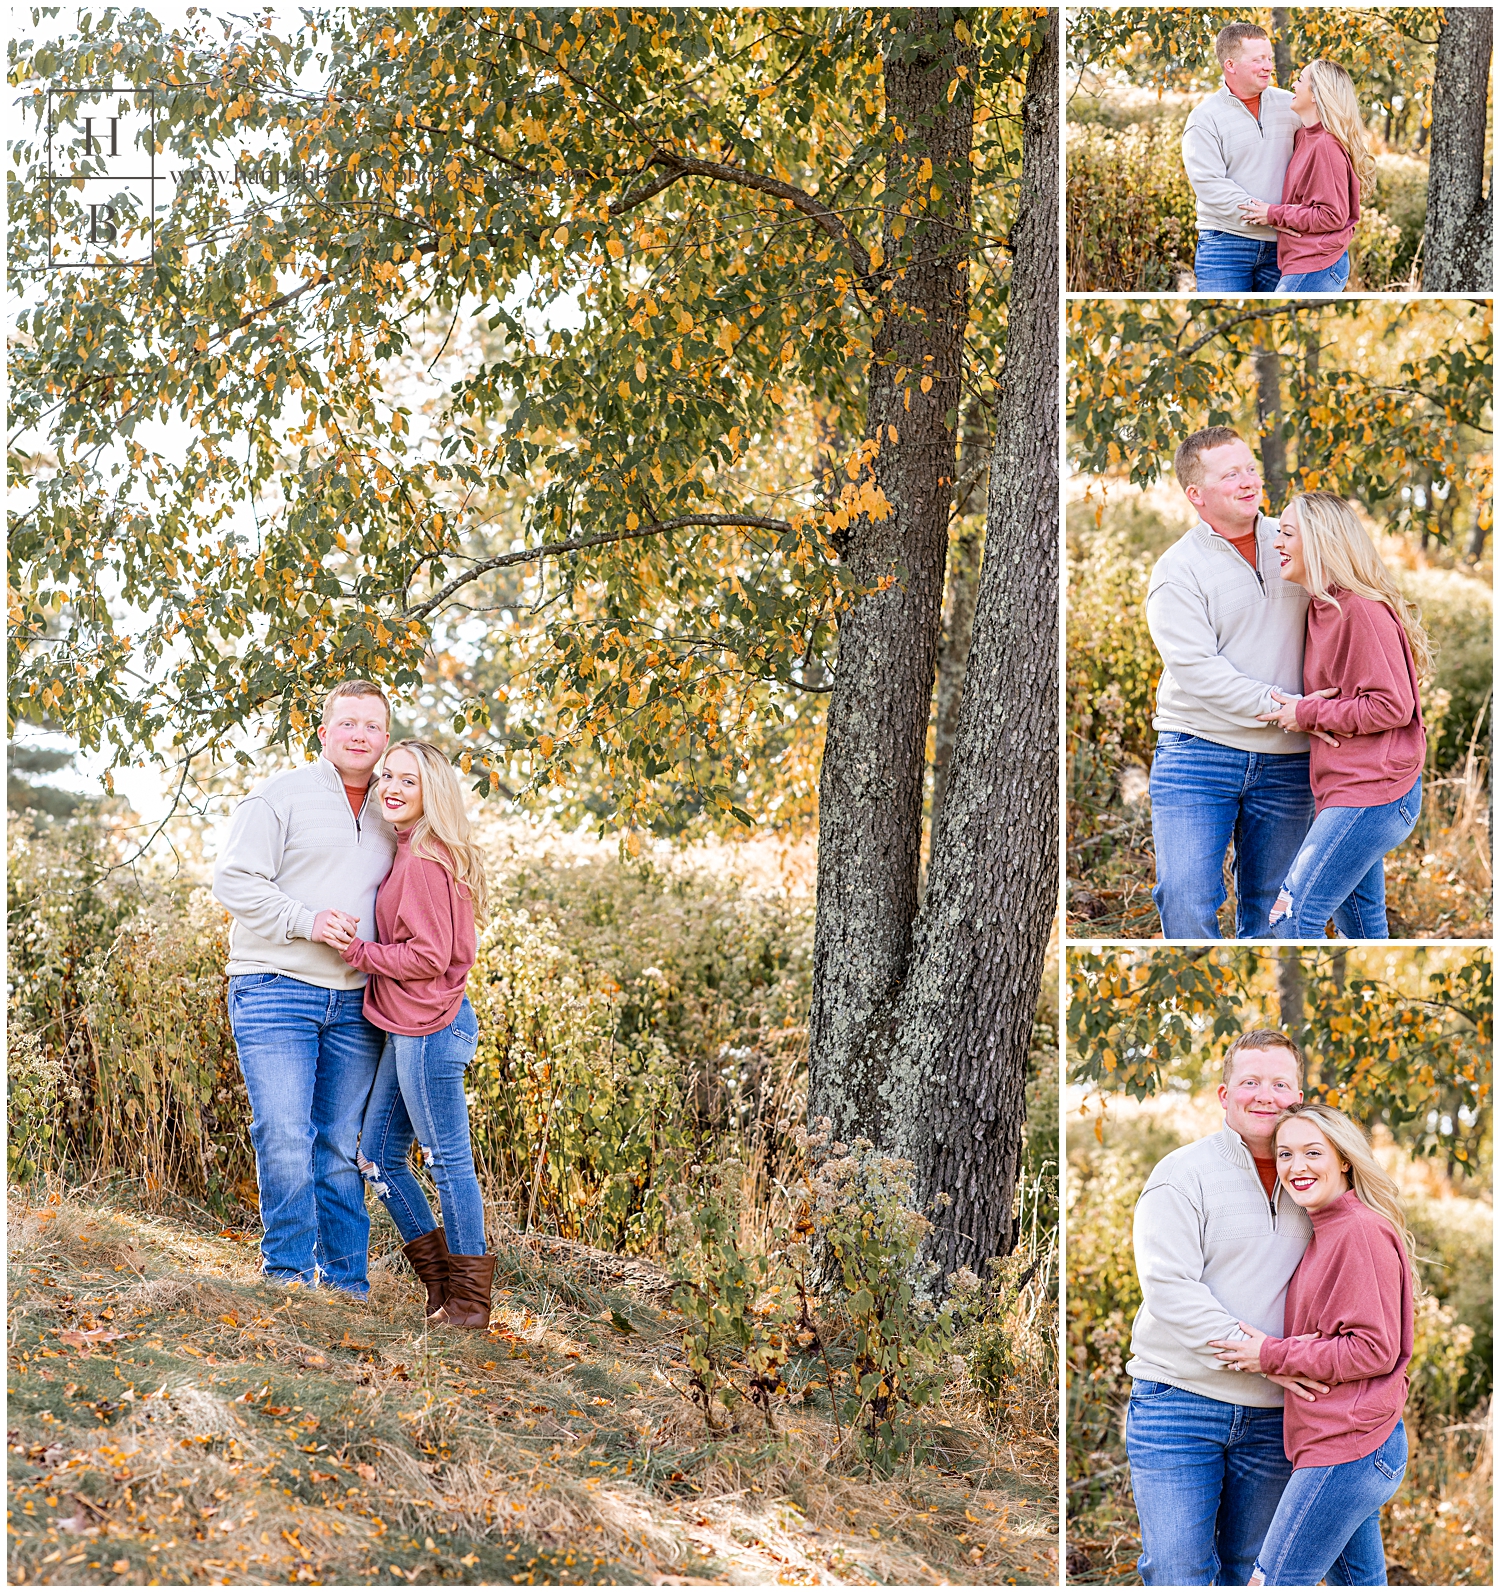 Couple stands by tree in fall brush and leaves for engagement photos.